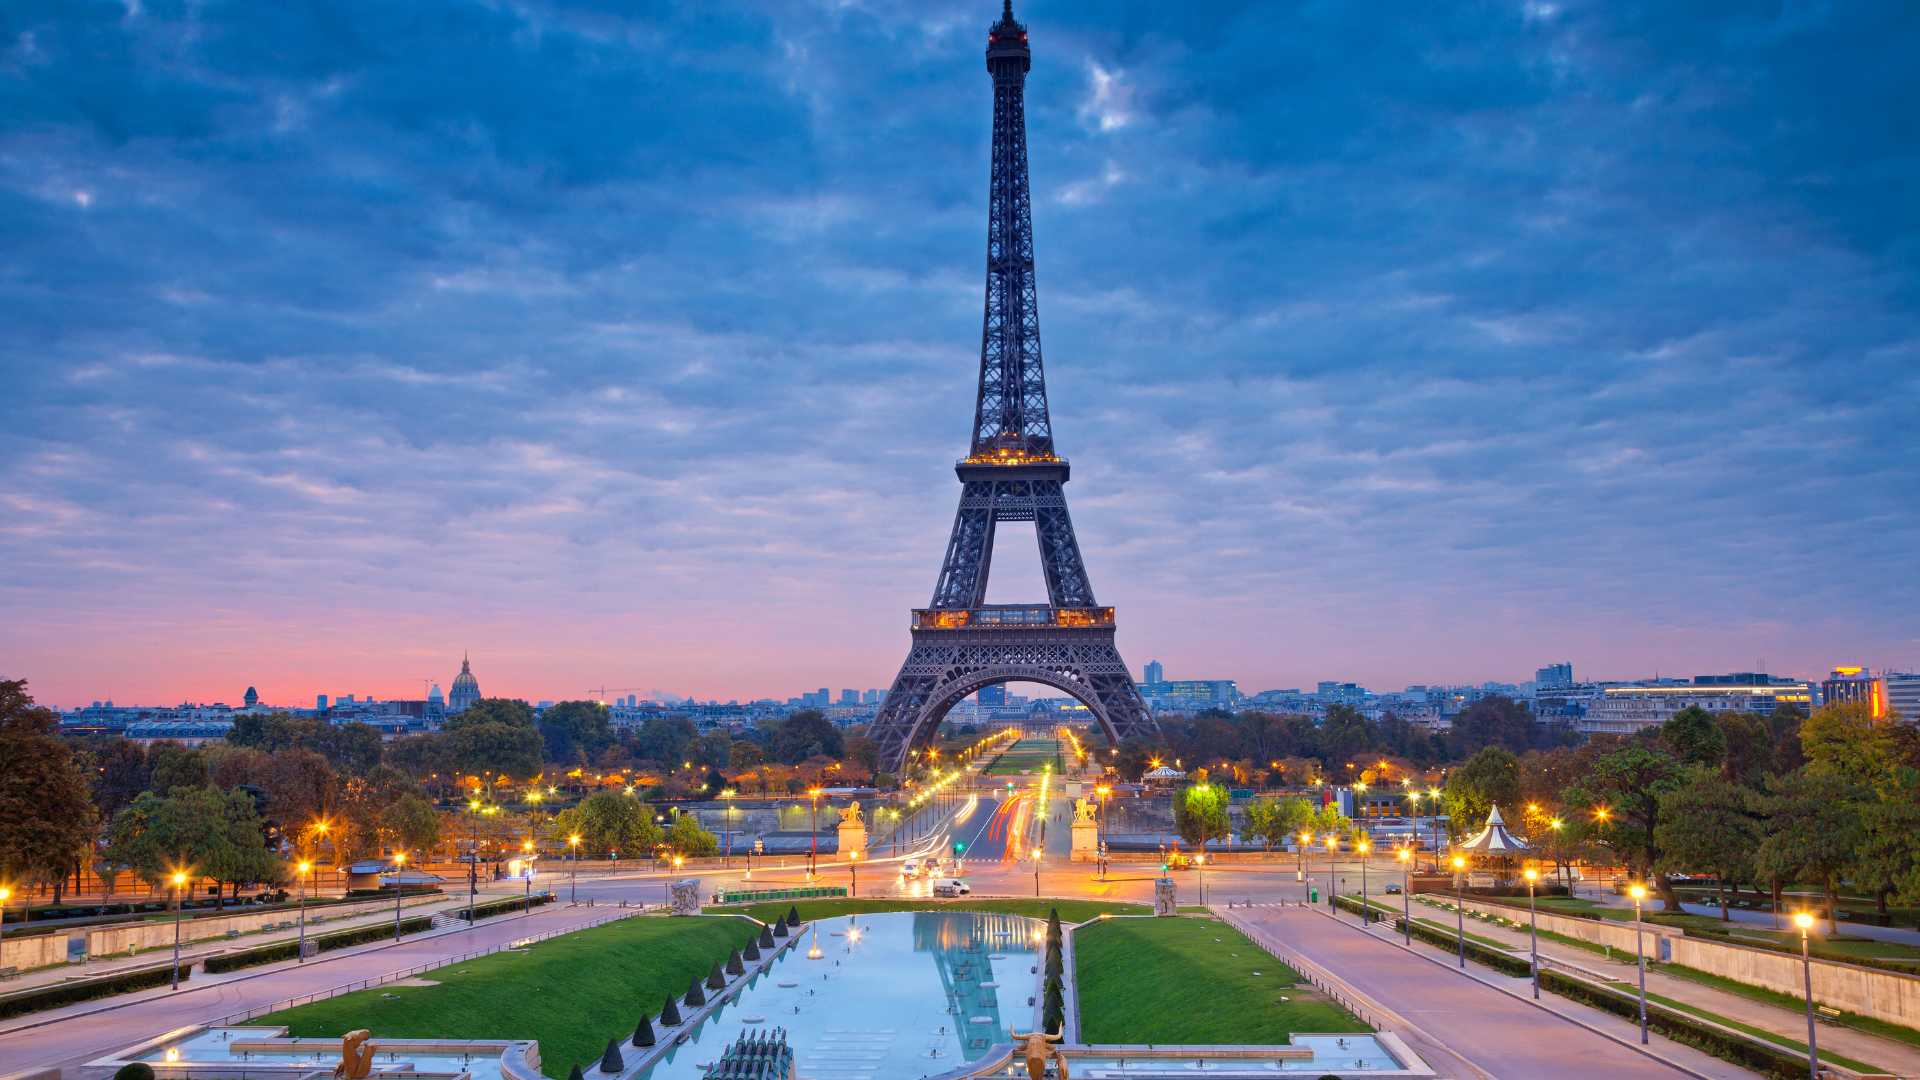 luxury travel from london to paris